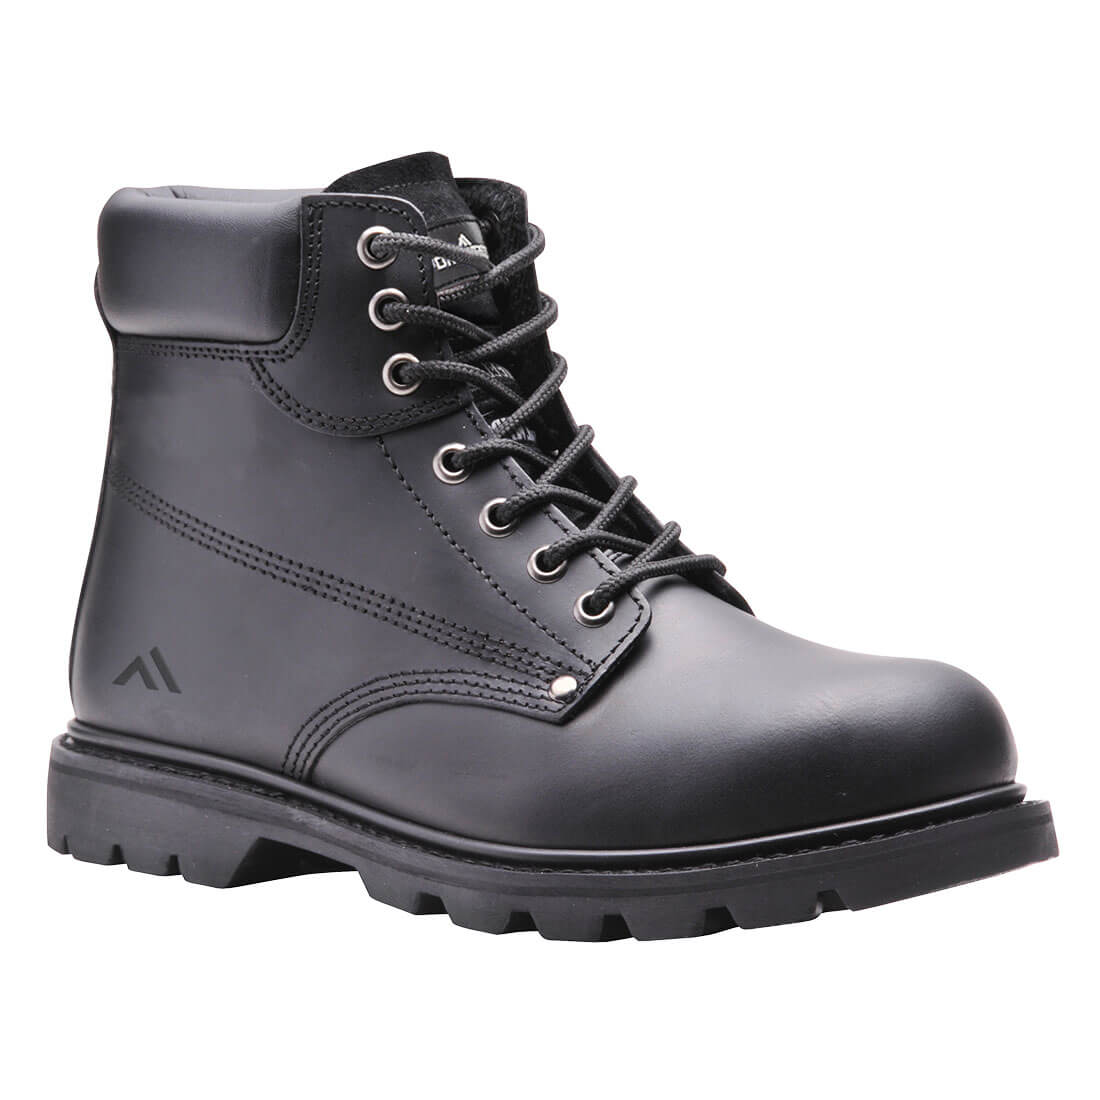 Steelite Welted Safety Boot SBP HRO Boots FW16